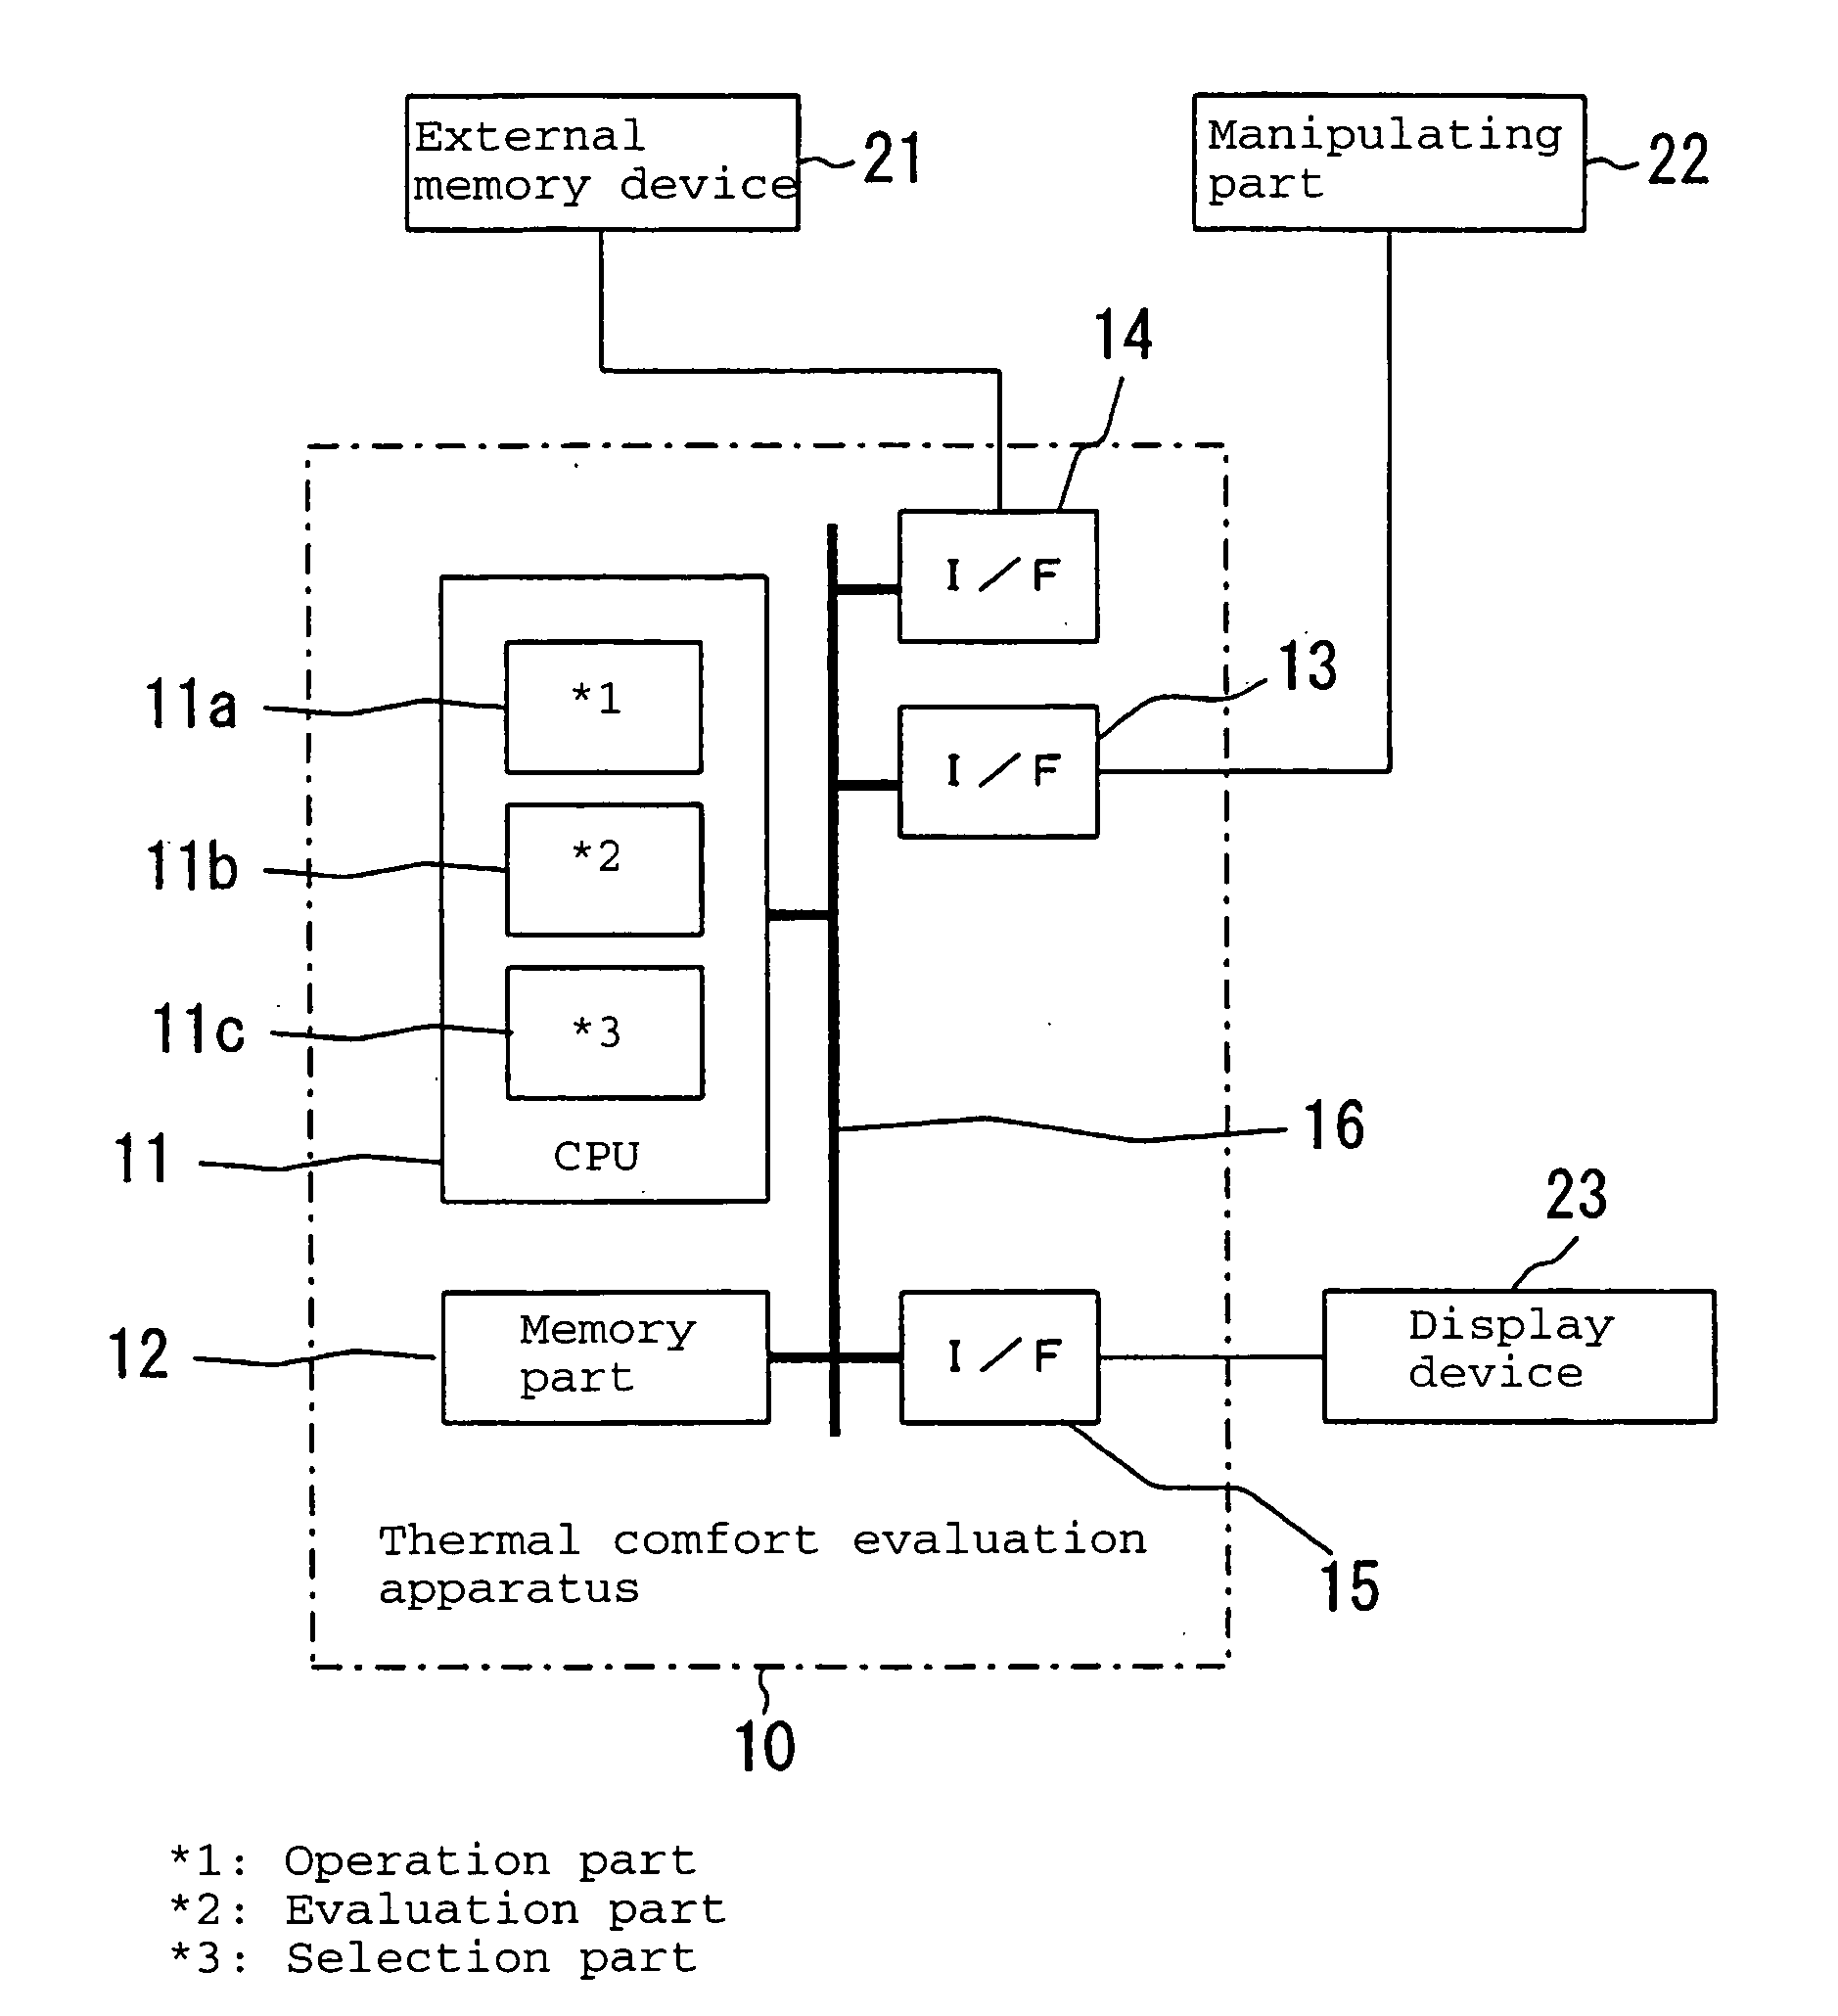 Method for evaluating thermal comfort of a structure and an assisting method, program or system for designing a structure in consideration of thermal comfort